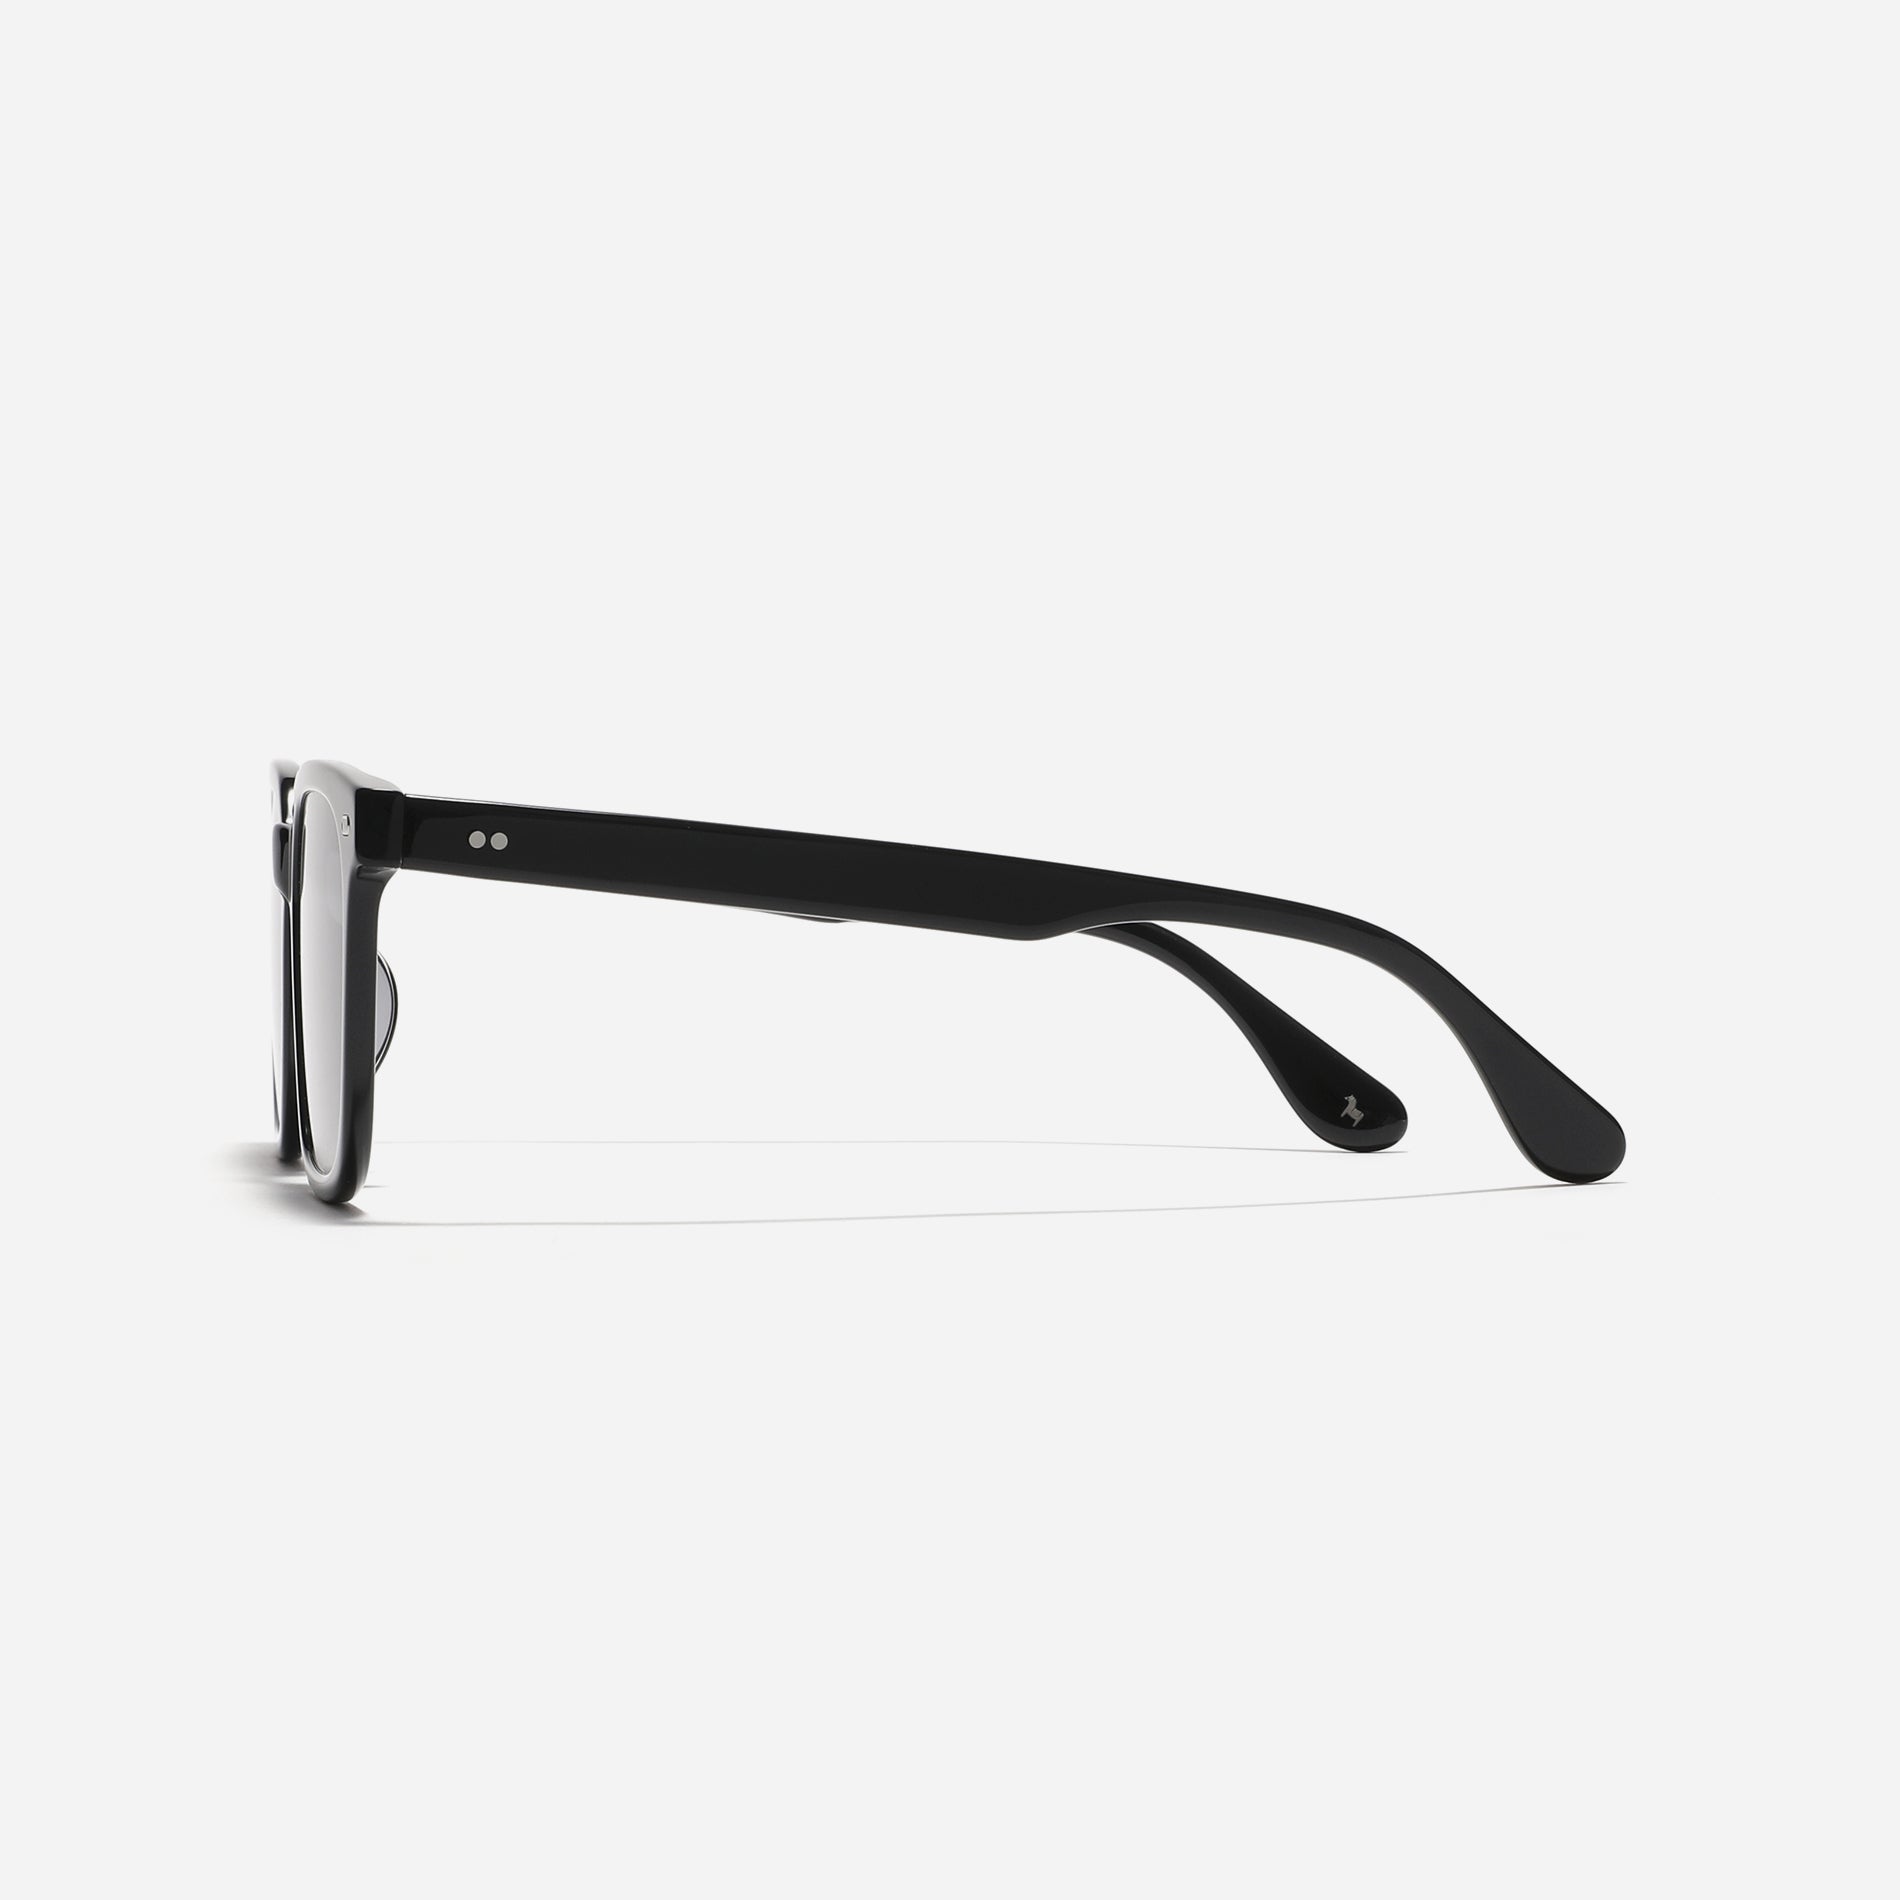 Oversized square-shaped sunglasses from the Forest Line. Their frame offers a chic style suitable for daily wear, especially appealing to those new to sunglasses.